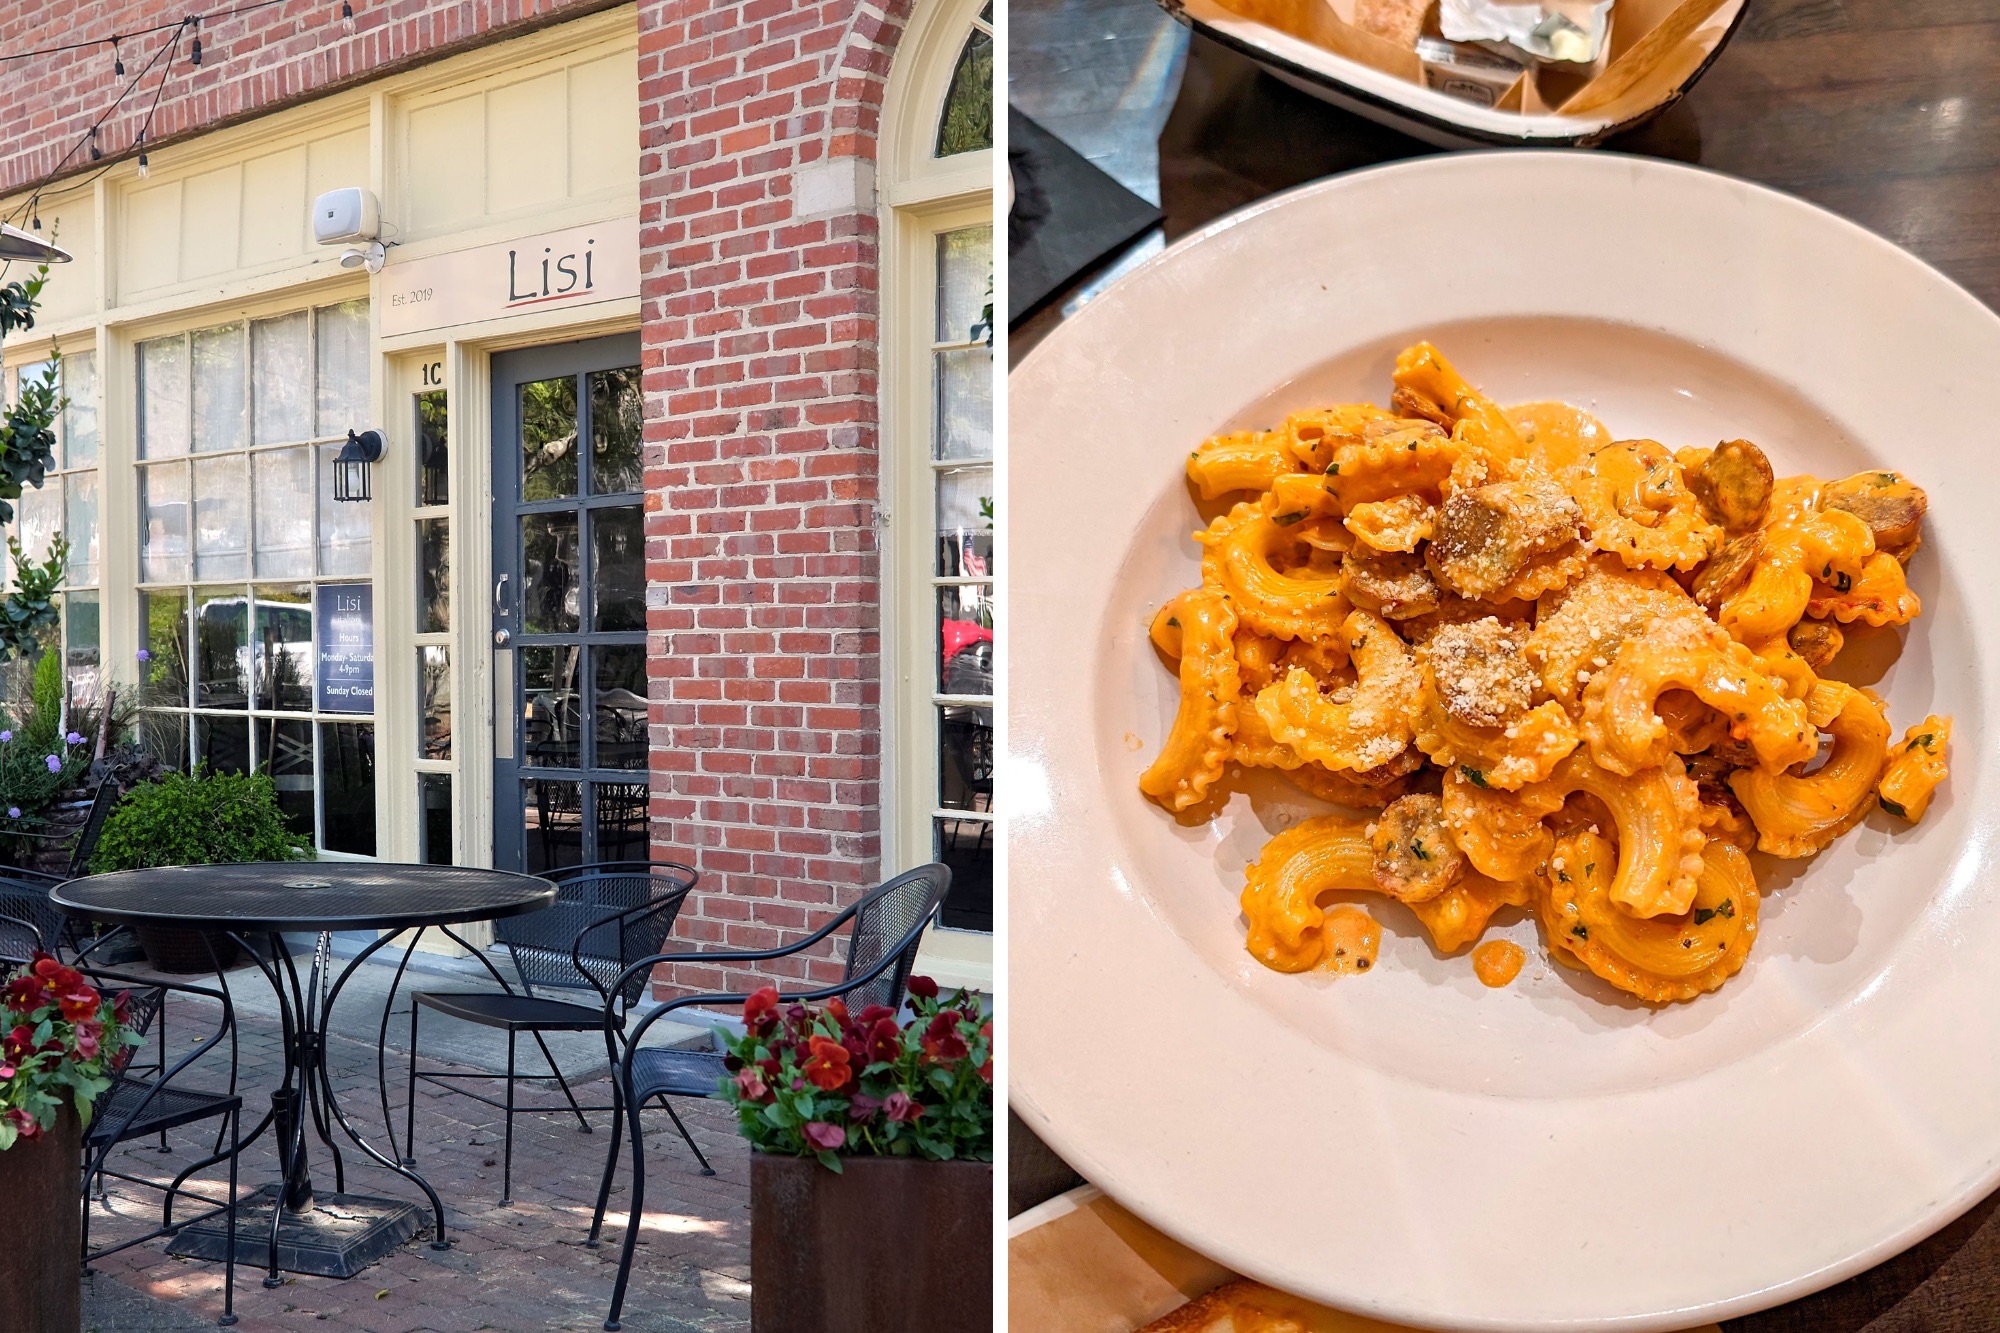 The patio at Lisi's and a bowl of pasta